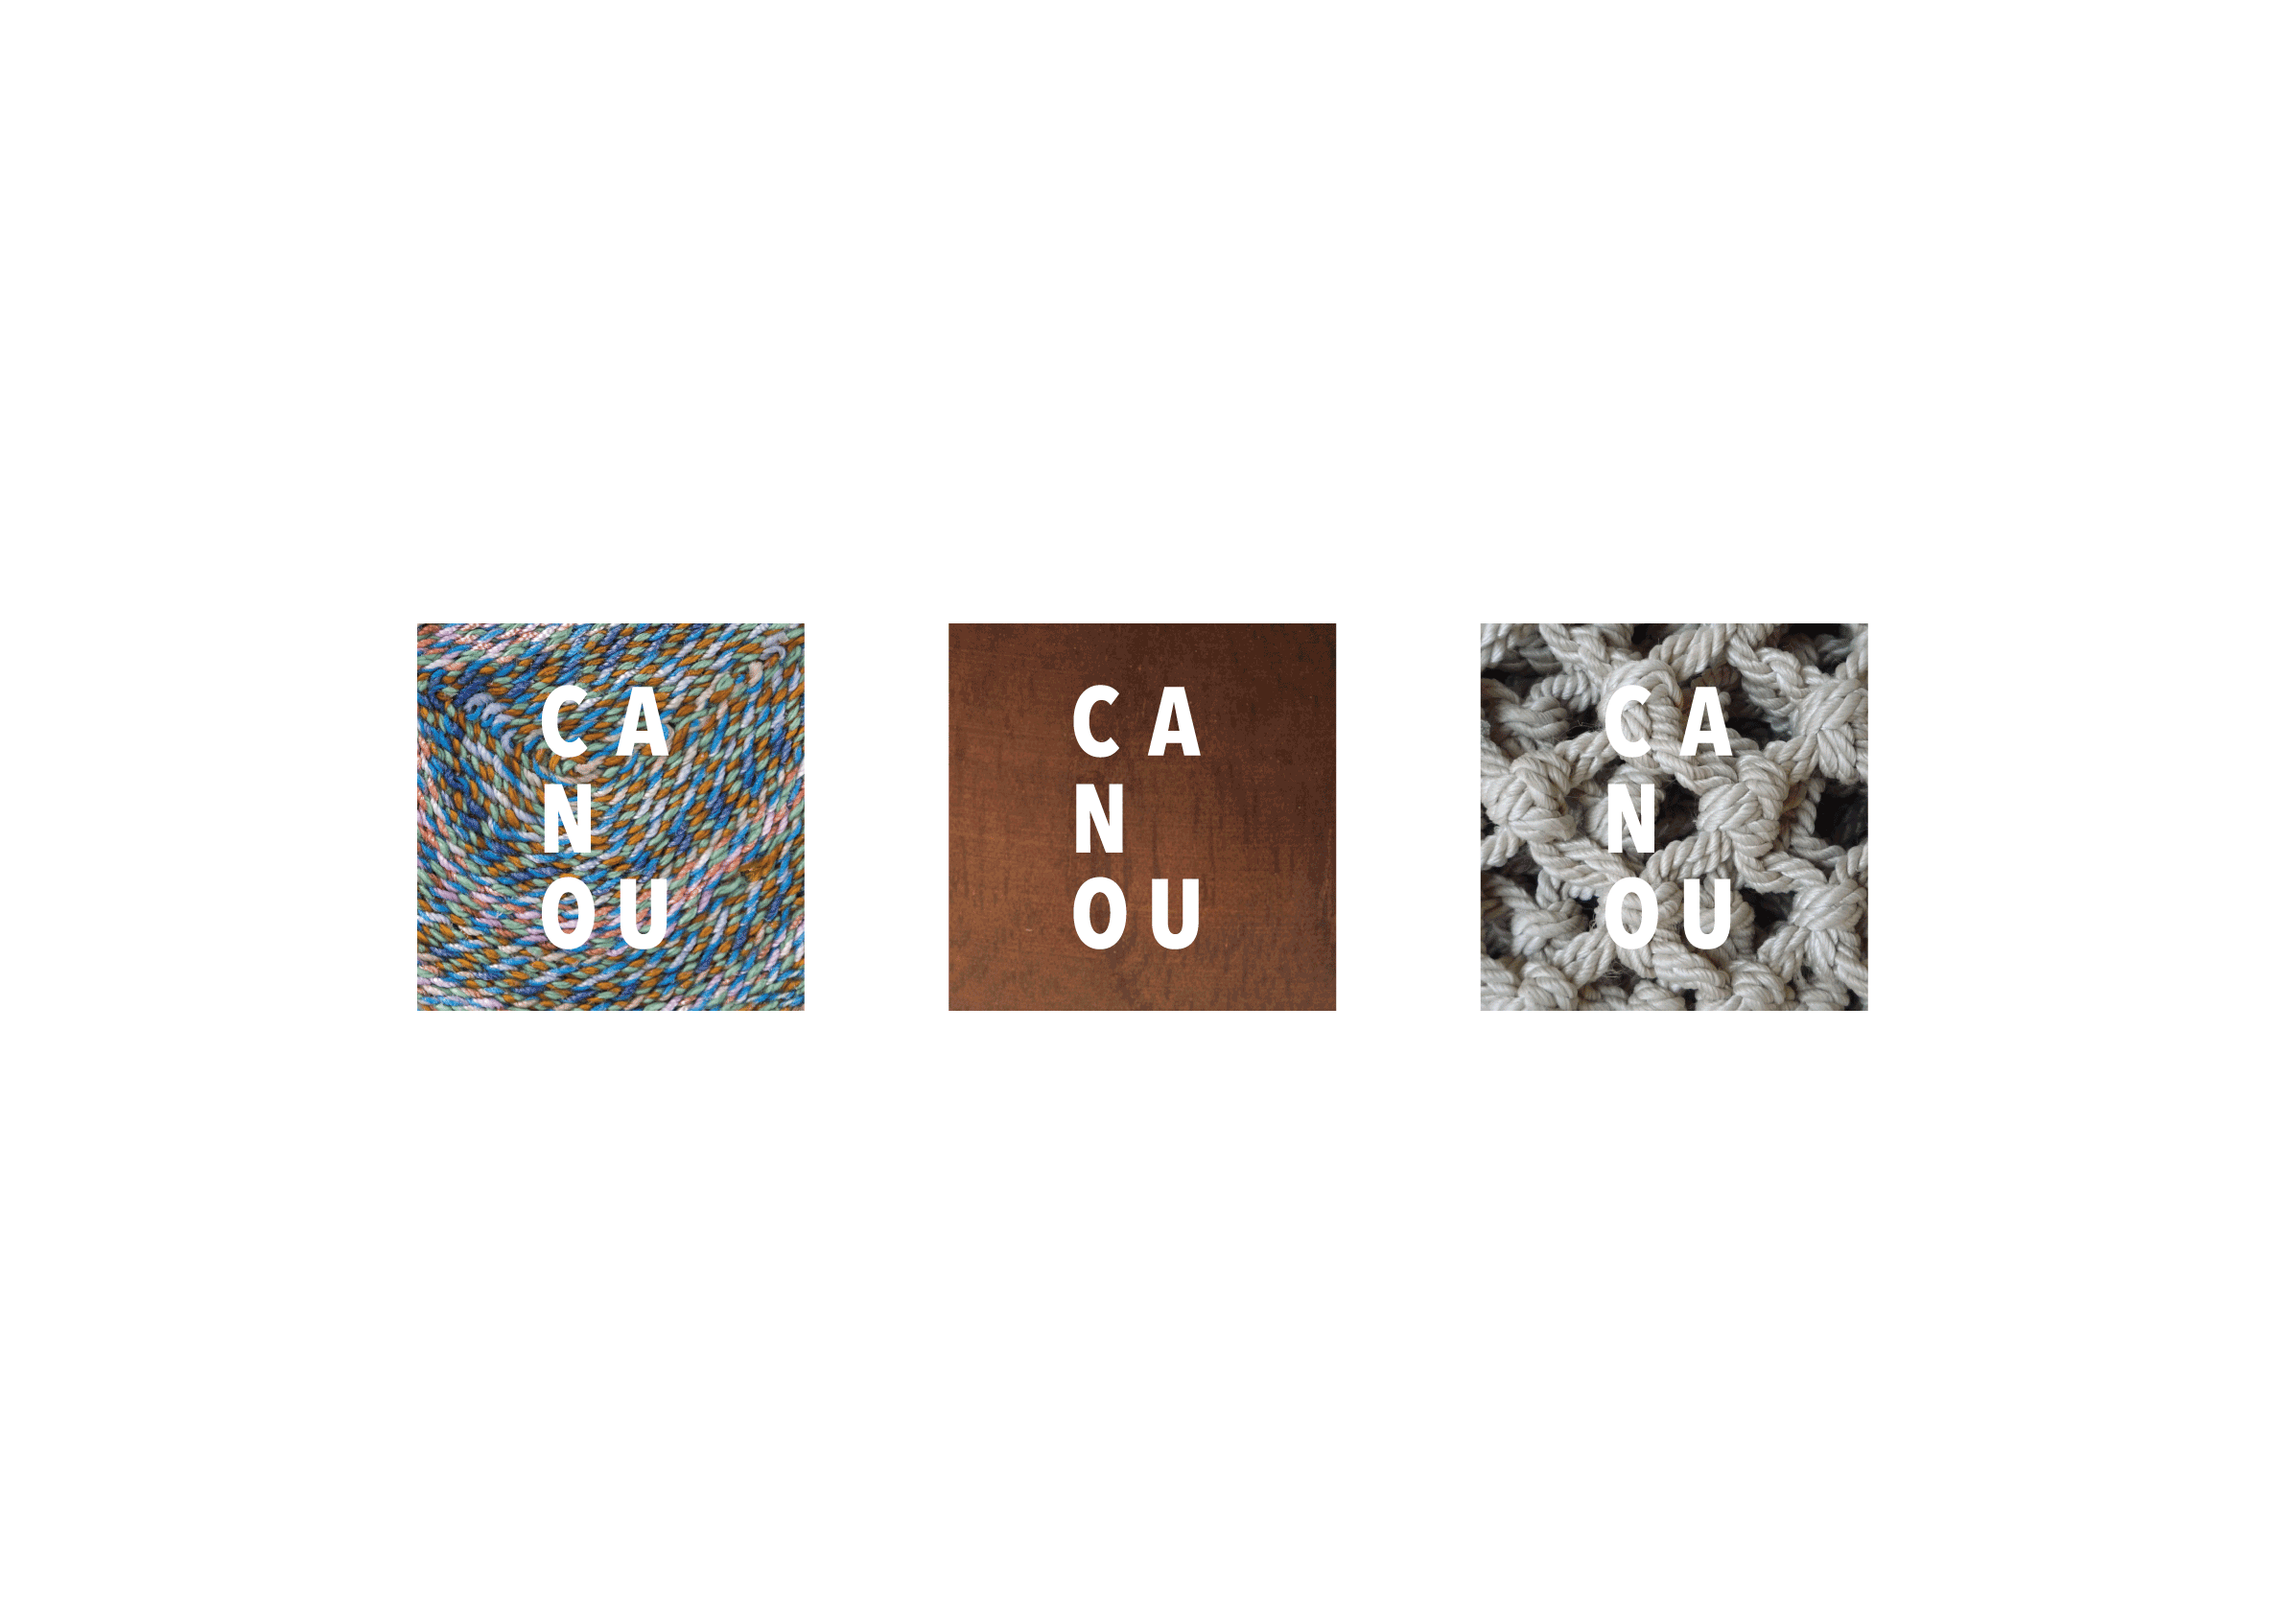 Social Media Icons for Canou, a Québec product manufacturer, by Ottawa Graphic Design Studio idApostle